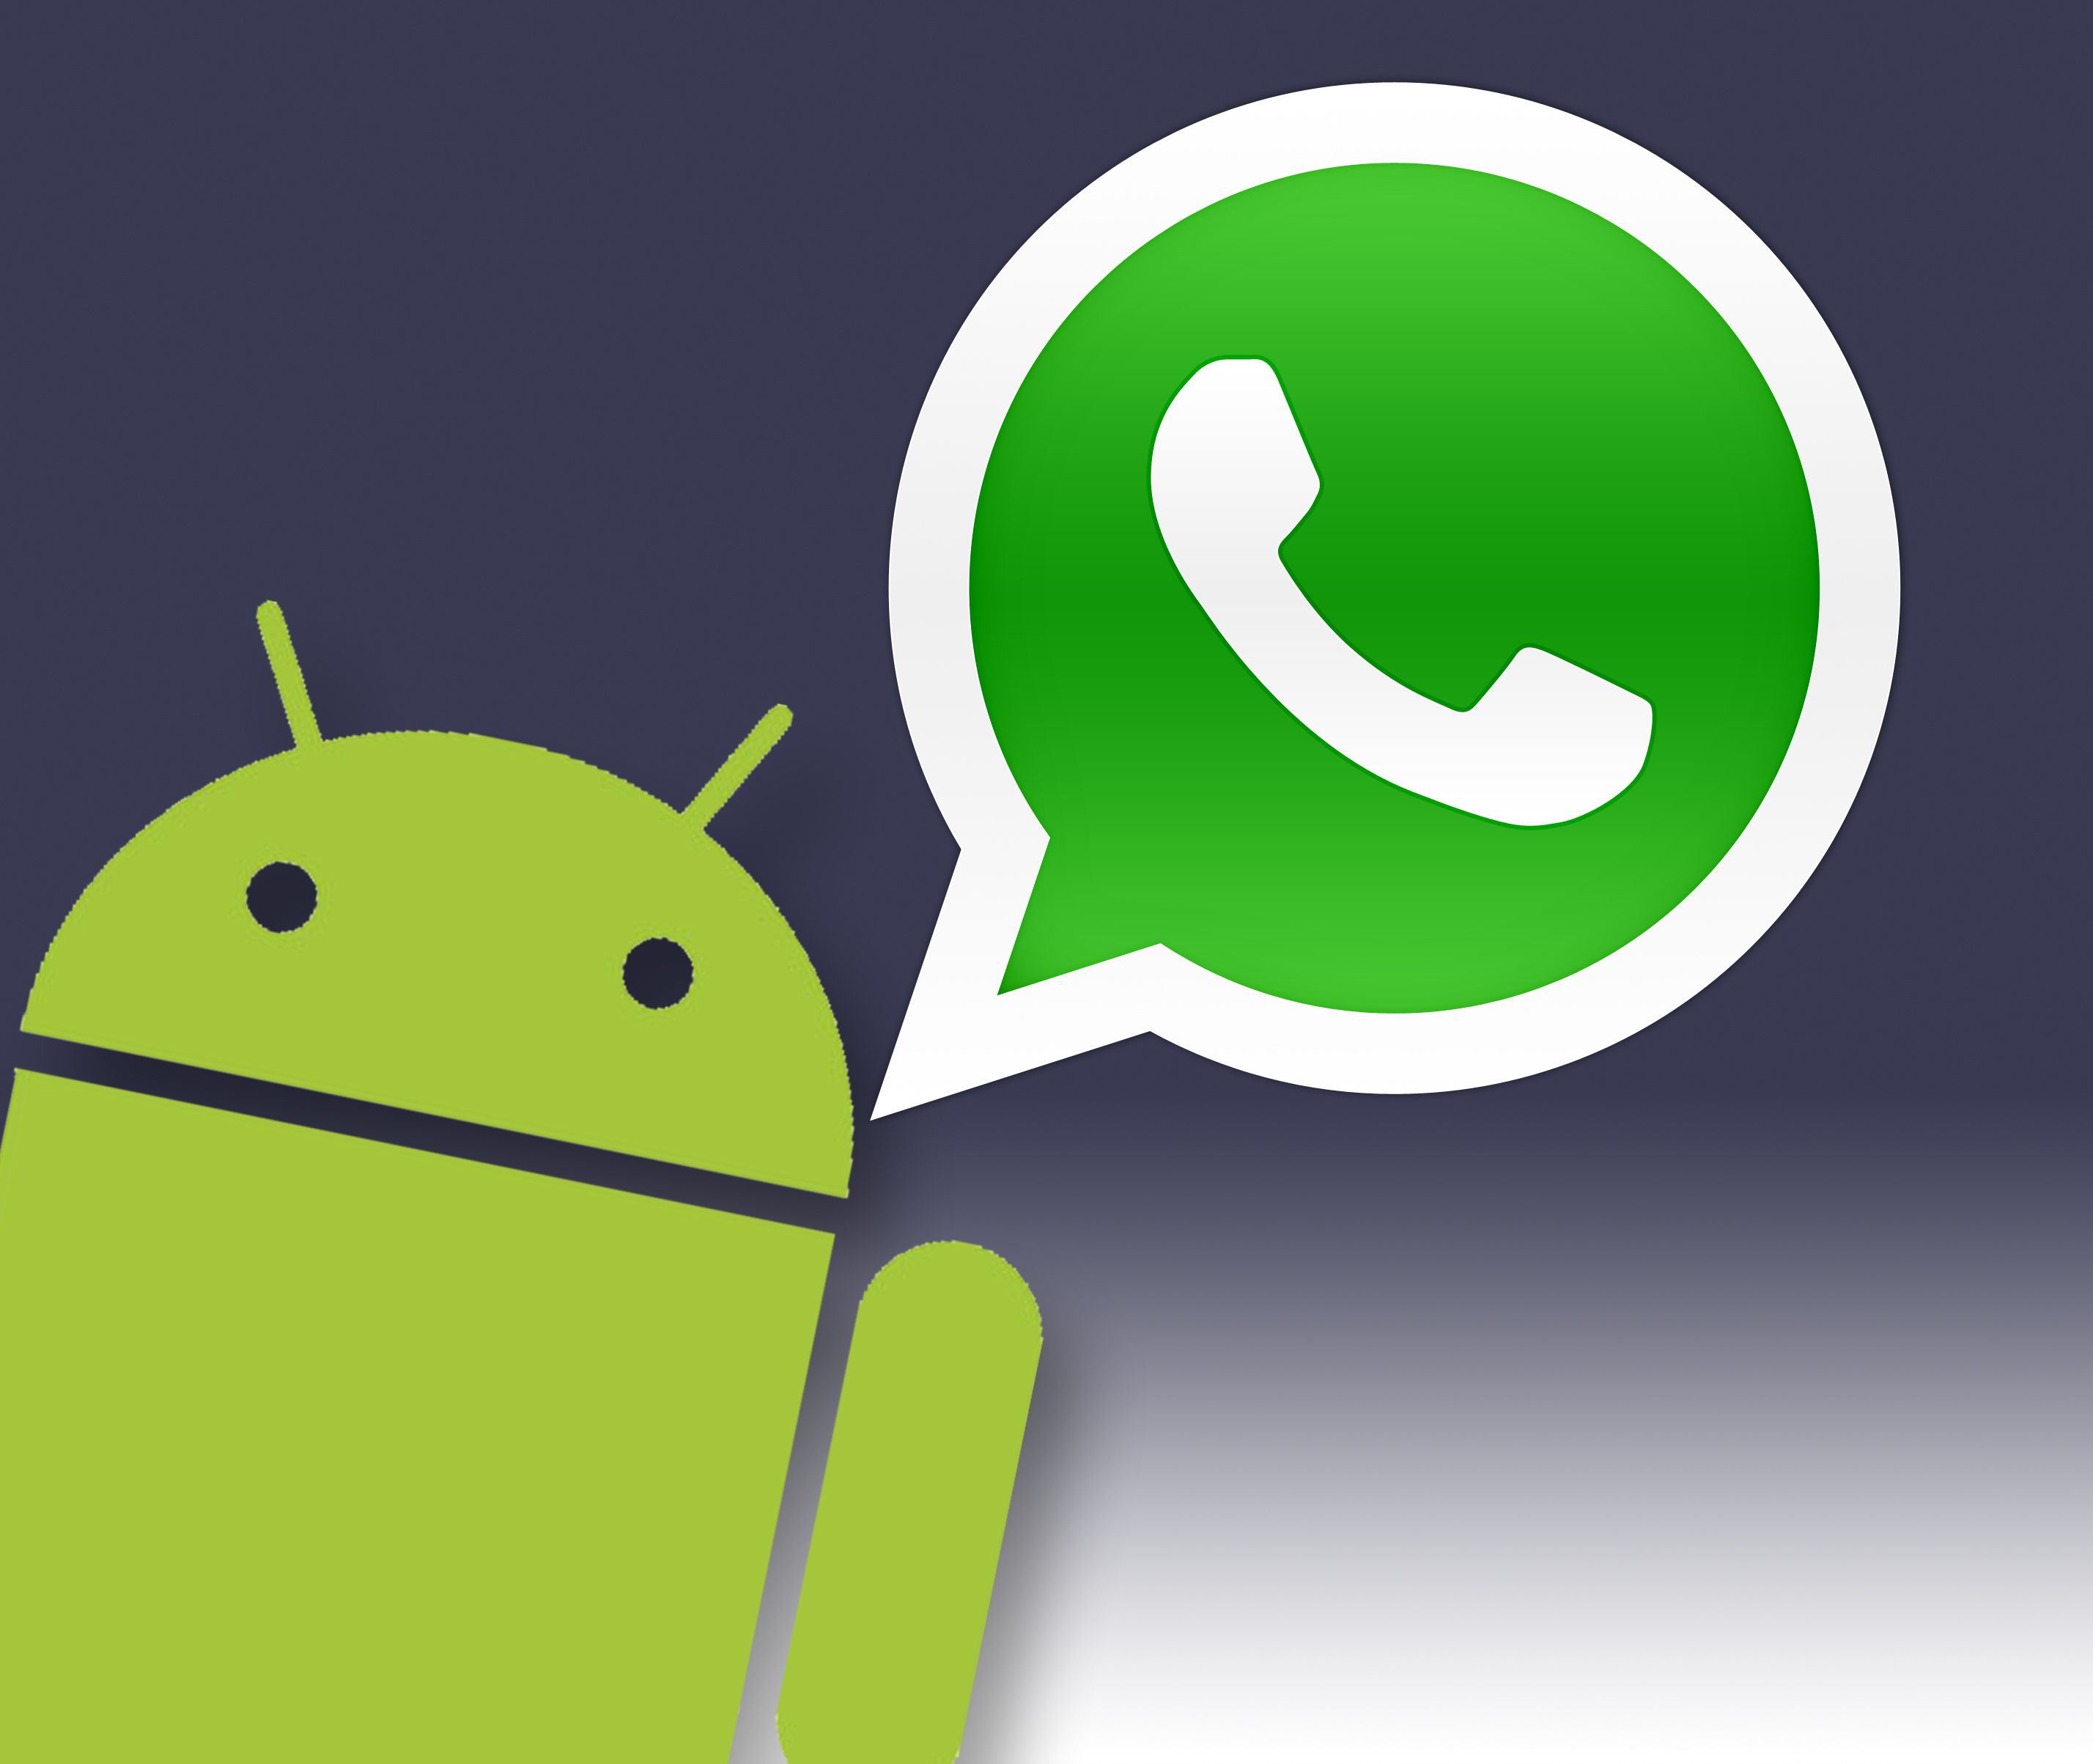 www whatsapp com android tablet